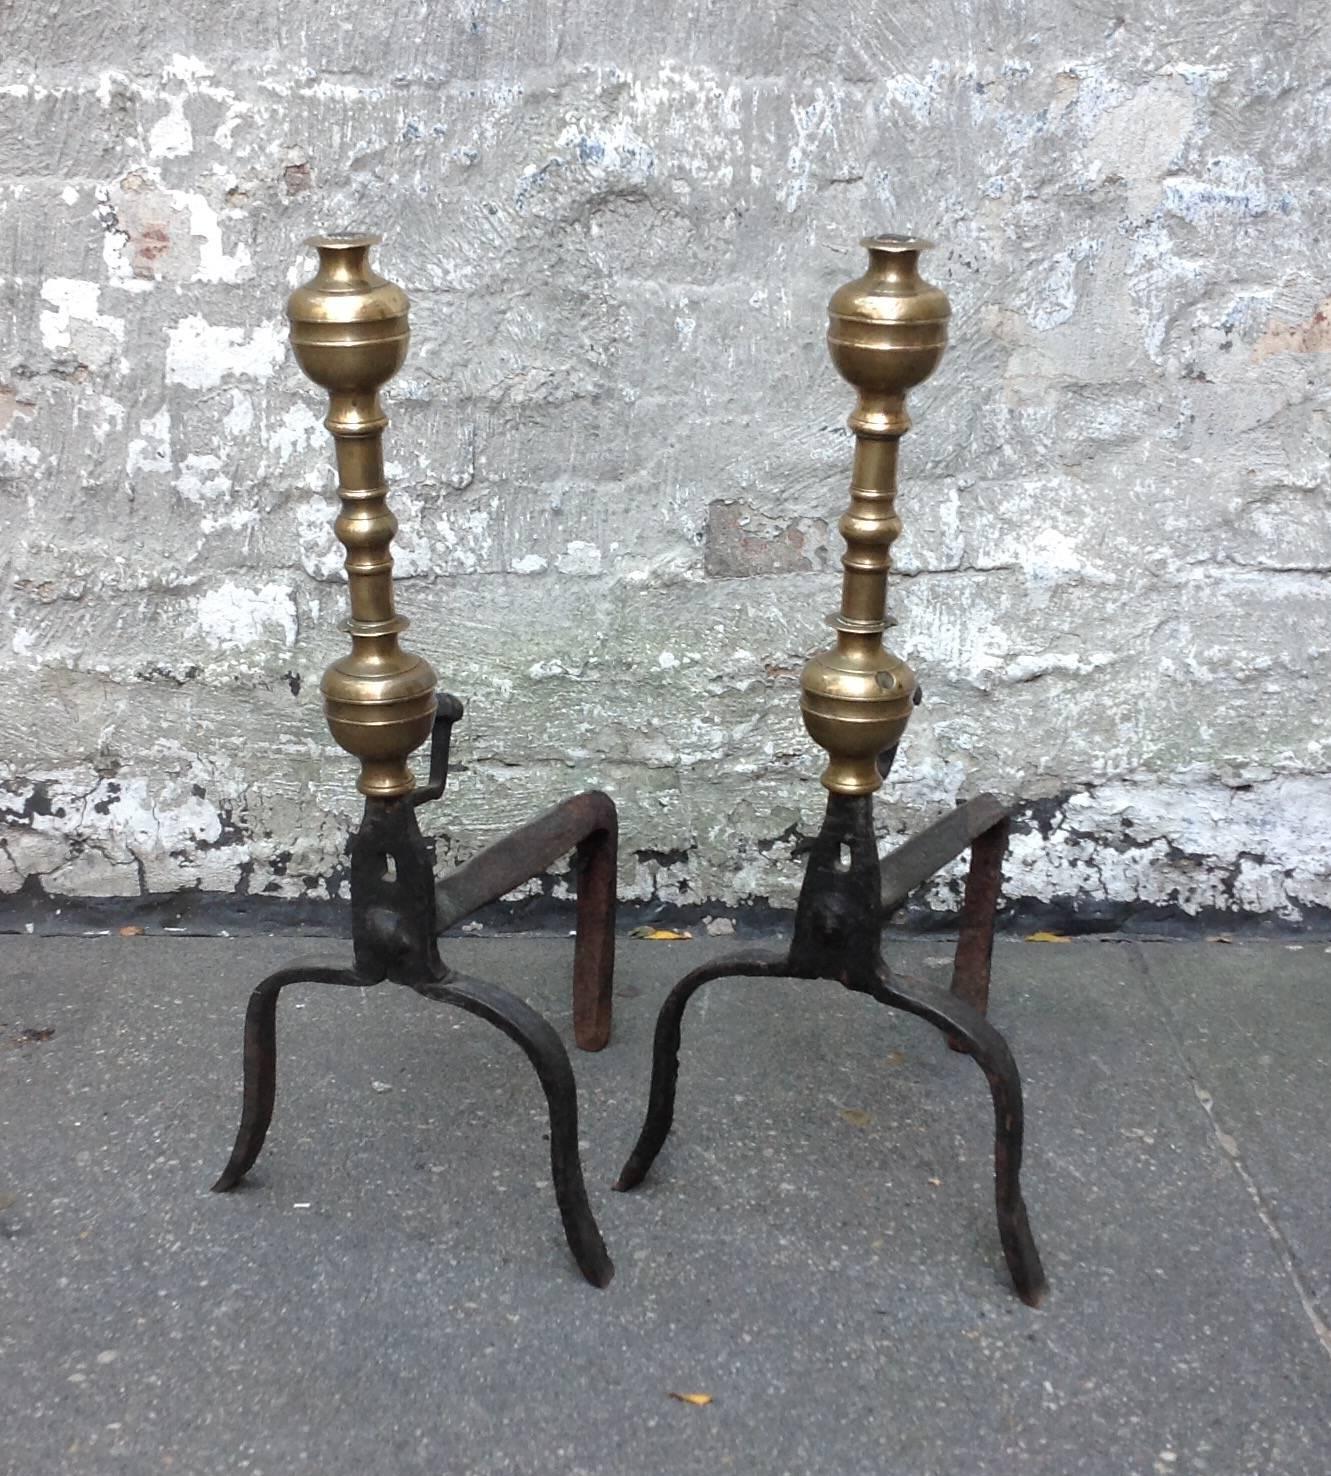 A pair of classical and elegant brass and wrought iron andirons with double acorn finials on balustrade shafts standing on graceful base of arched legs. Uncommonly shallow.